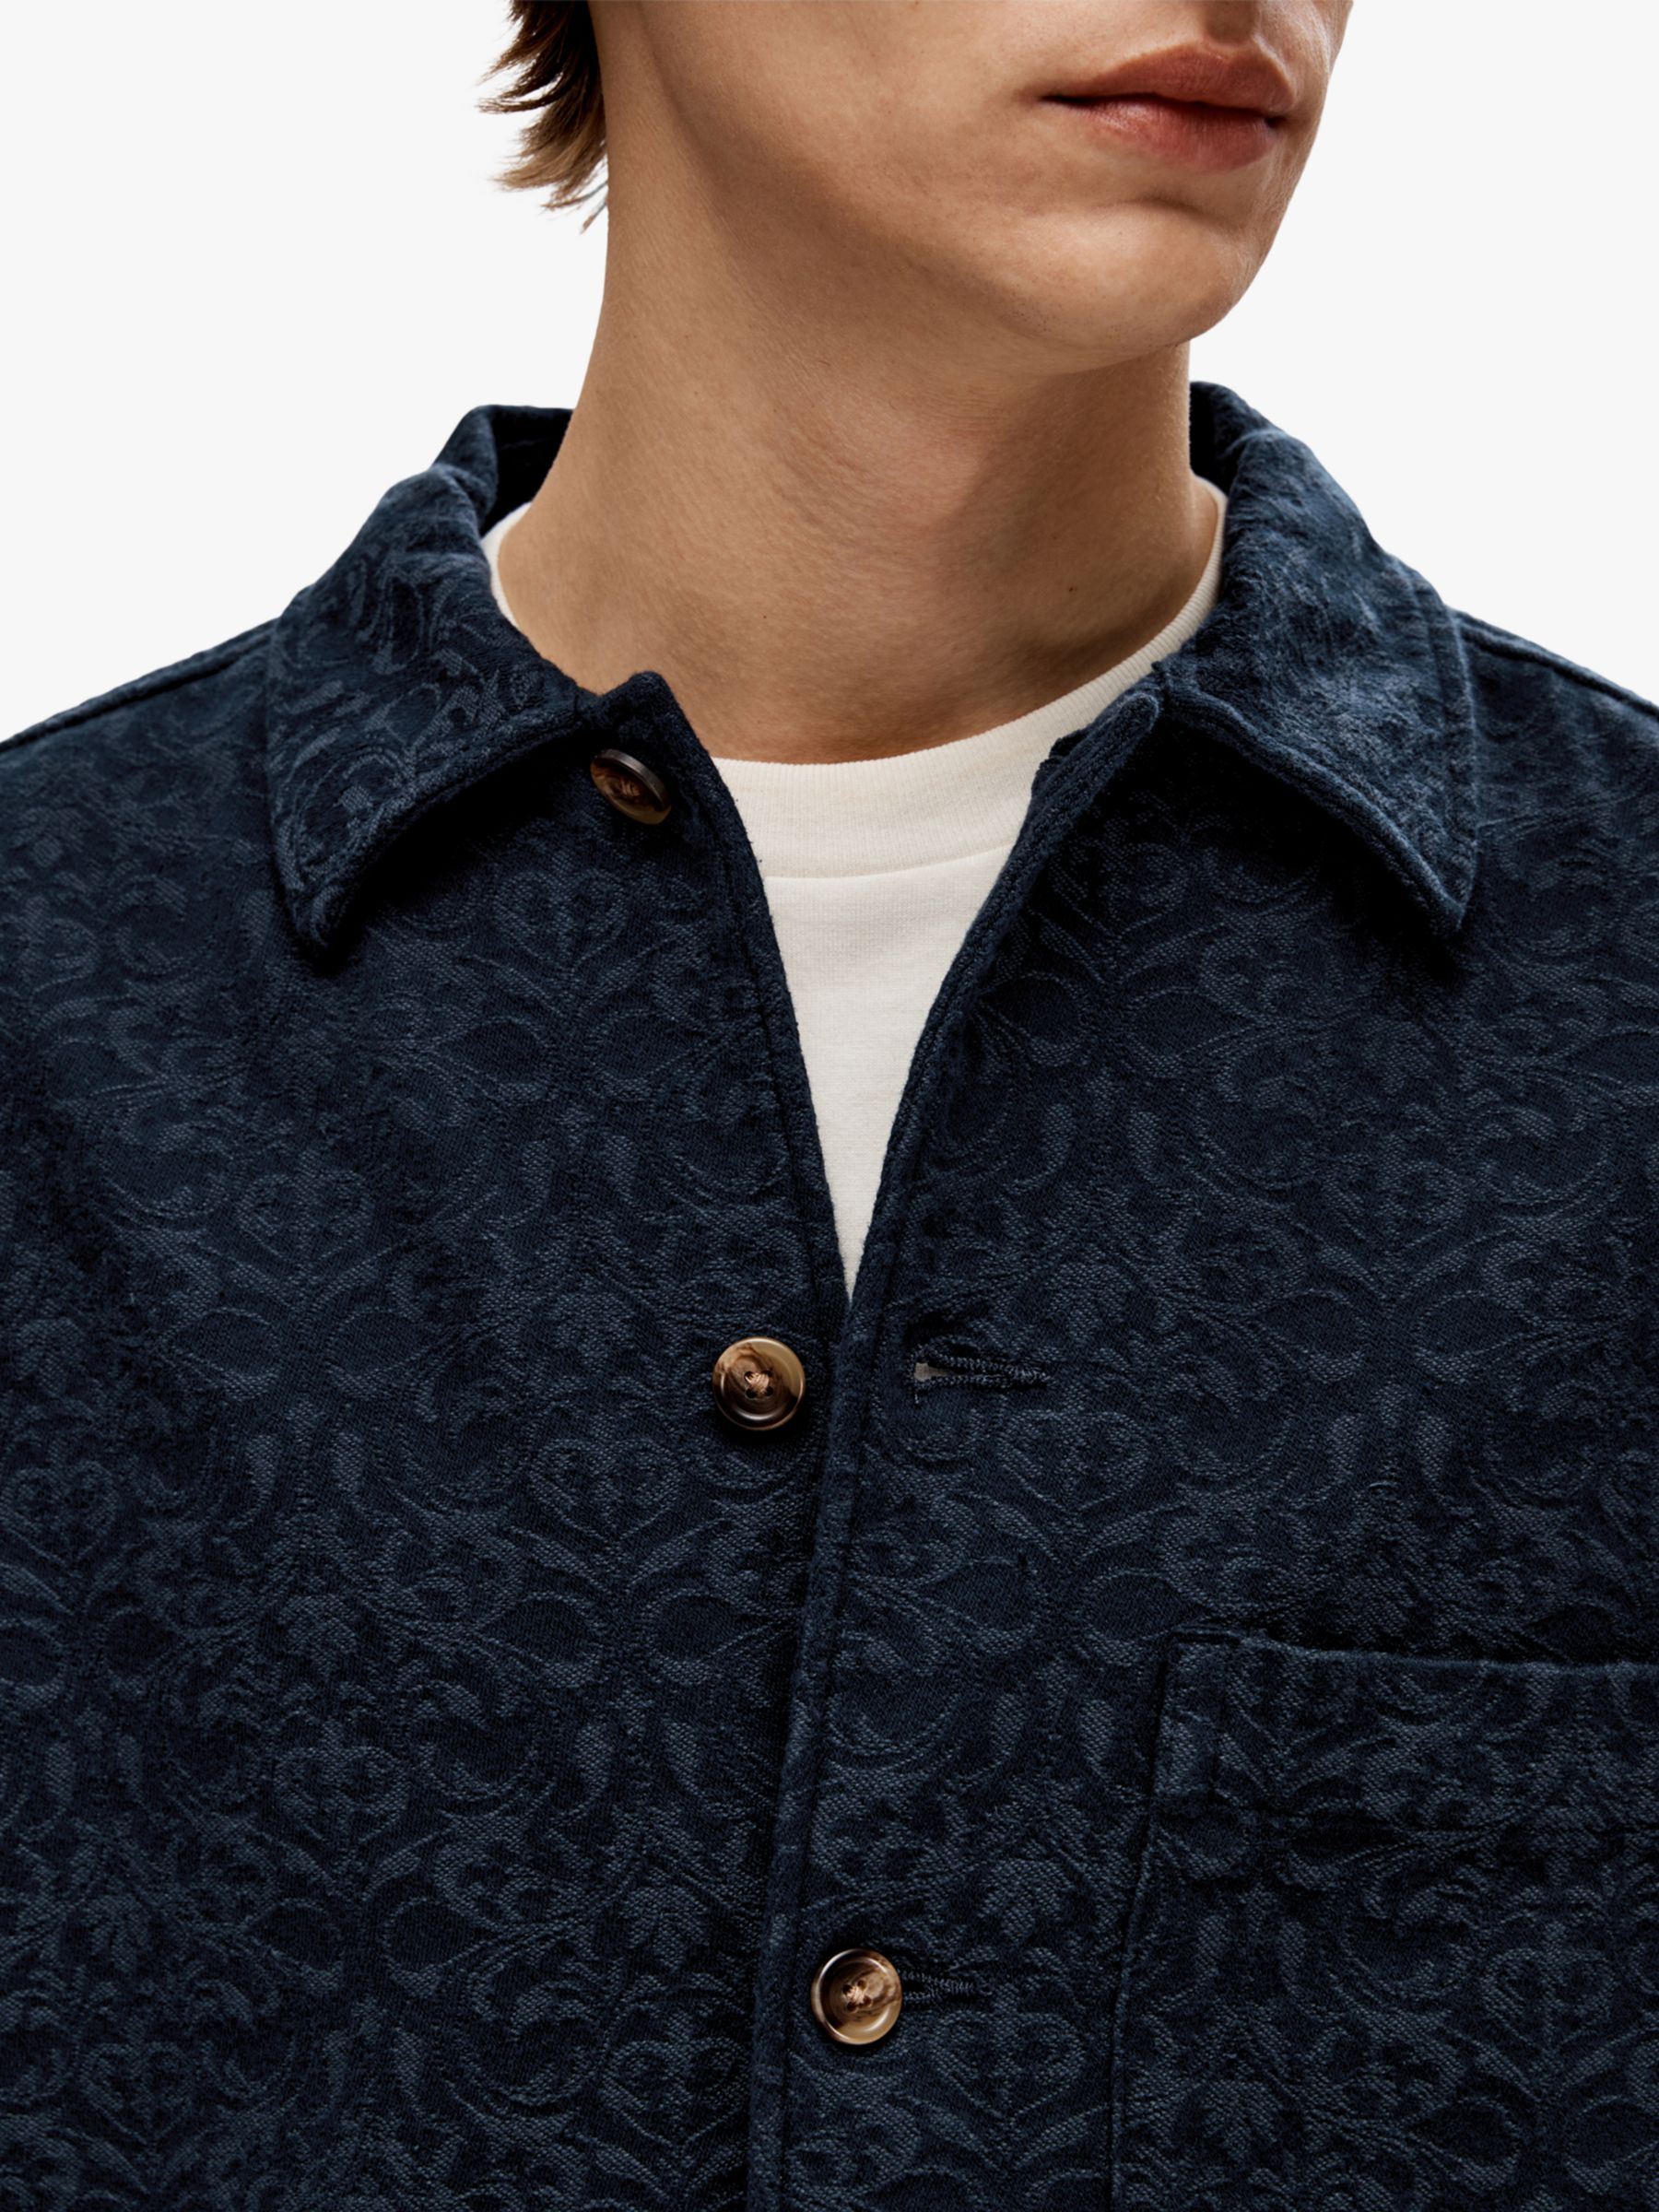 SELECTED HOMME Jason Overshirt, Navy, S